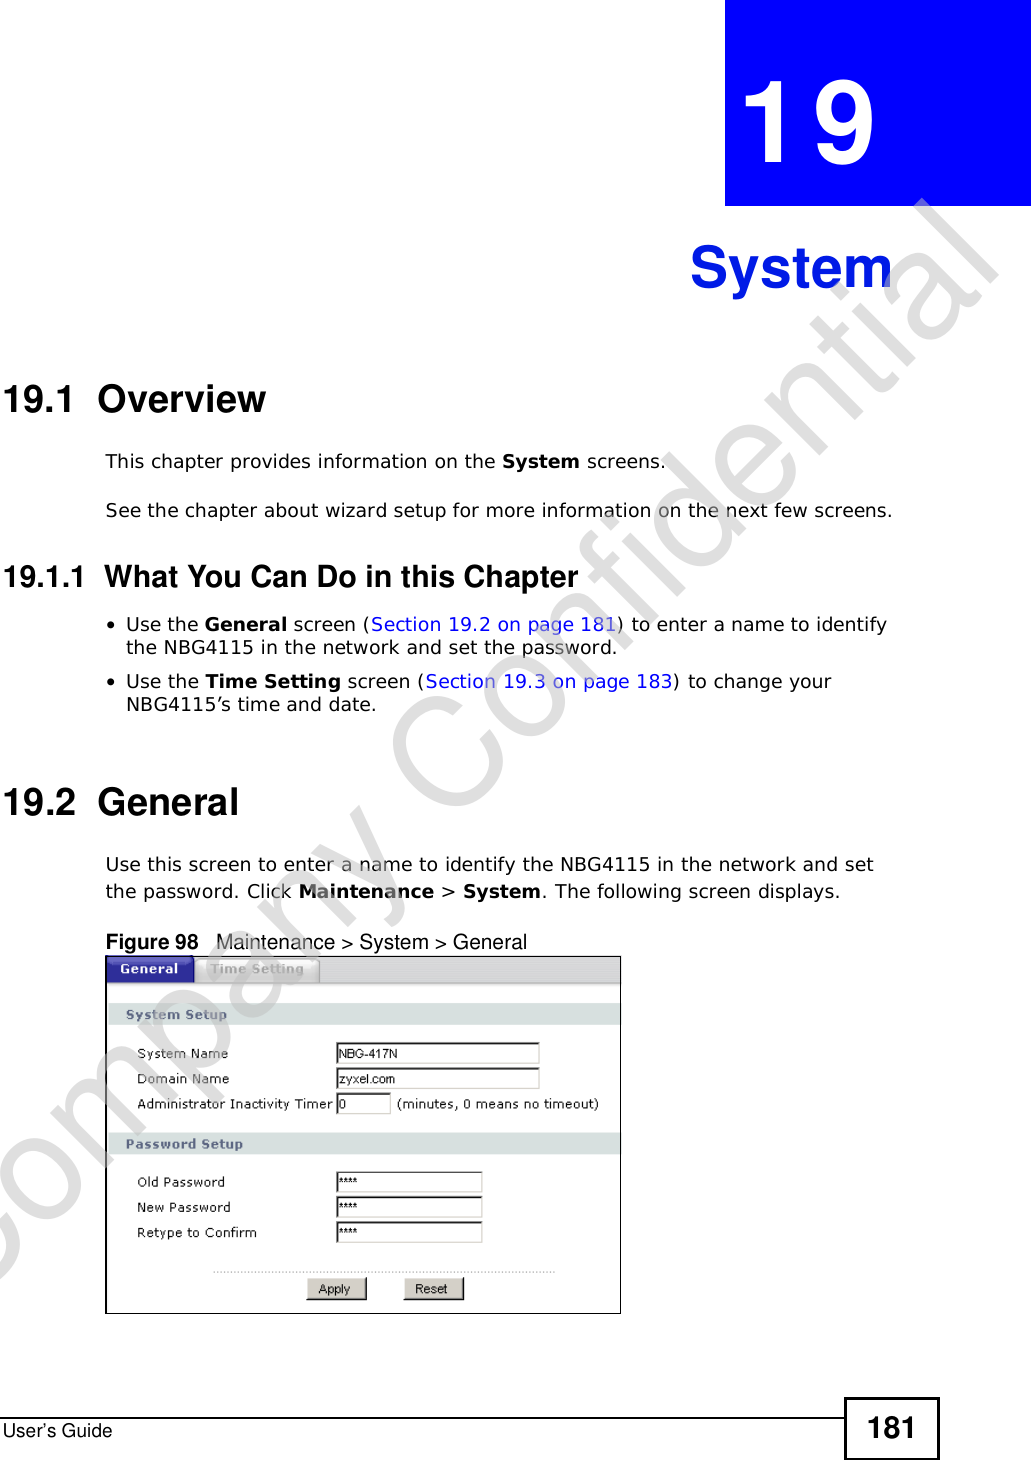 User’s Guide 181CHAPTER 19System19.1  OverviewThis chapter provides information on the System screens. See the chapter about wizard setup for more information on the next few screens.19.1.1  What You Can Do in this Chapter•Use the General screen (Section 19.2 on page 181) to enter a name to identify the NBG4115 in the network and set the password.•Use the Time Setting screen (Section 19.3 on page 183) to change your NBG4115’s time and date.19.2  GeneralUse this screen to enter a name to identify the NBG4115 in the network and set the password. Click Maintenance &gt; System. The following screen displays.Figure 98   Maintenance &gt; System &gt; General Company Confidential